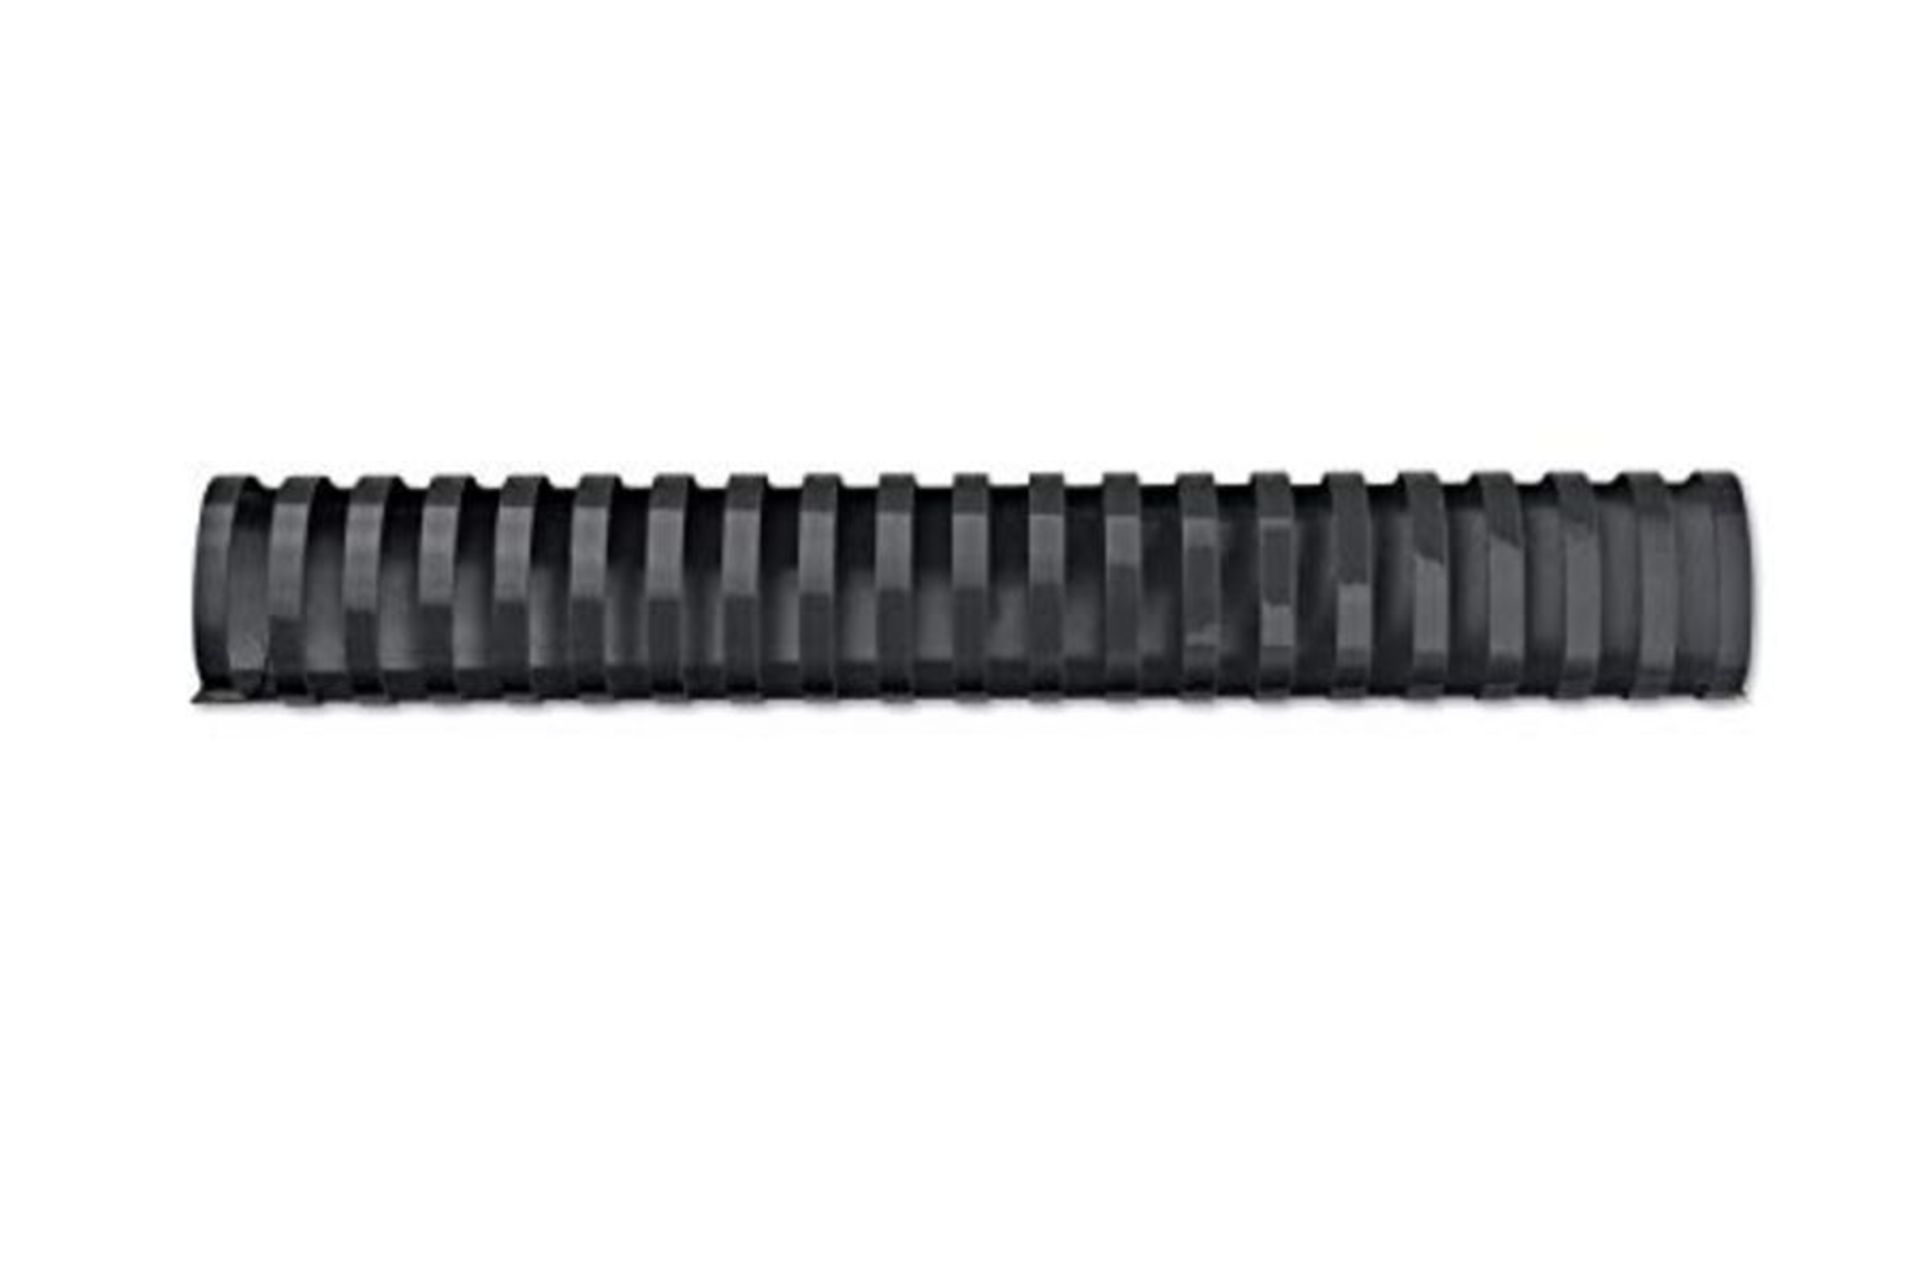 GBC CombBind Binding Combs, 38 mm, 330 Sheet Capacity, A4, 21 Ring, Black, Pack of 50,